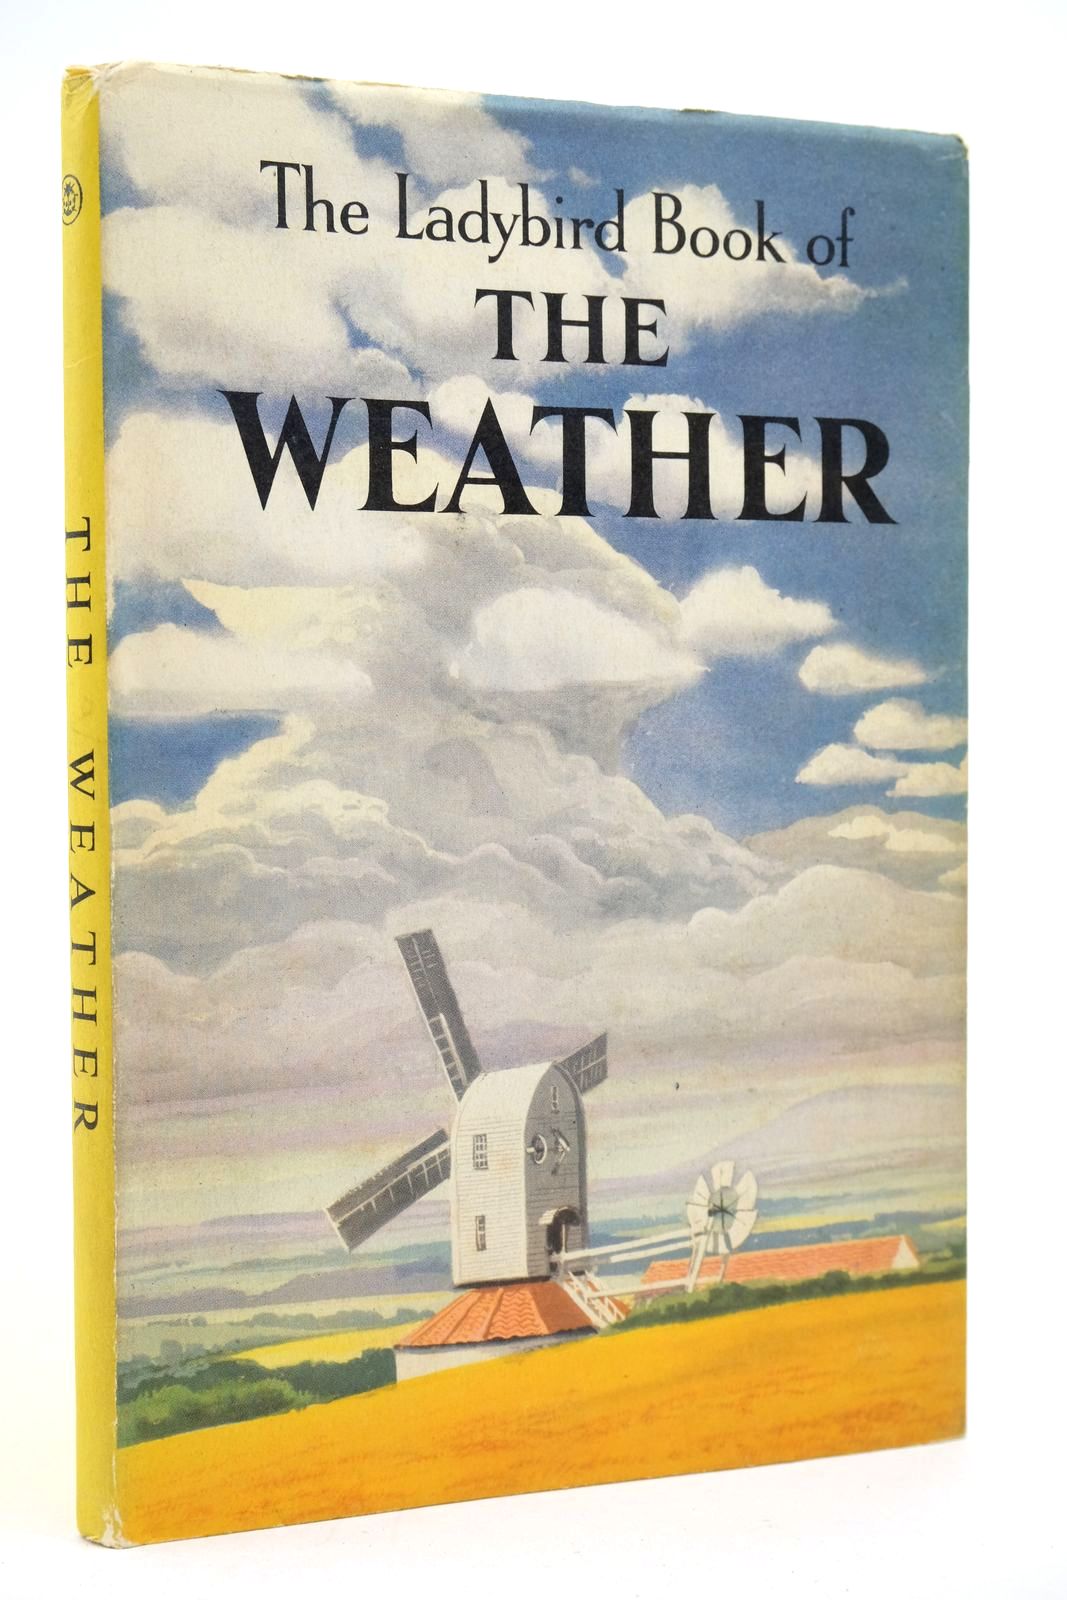 Photo of THE LADYBIRD BOOK OF THE WEATHER written by Newing, F.E. Bowood, Richard illustrated by Ayton, Robert published by Wills &amp; Hepworth Ltd. (STOCK CODE: 2139707)  for sale by Stella & Rose's Books